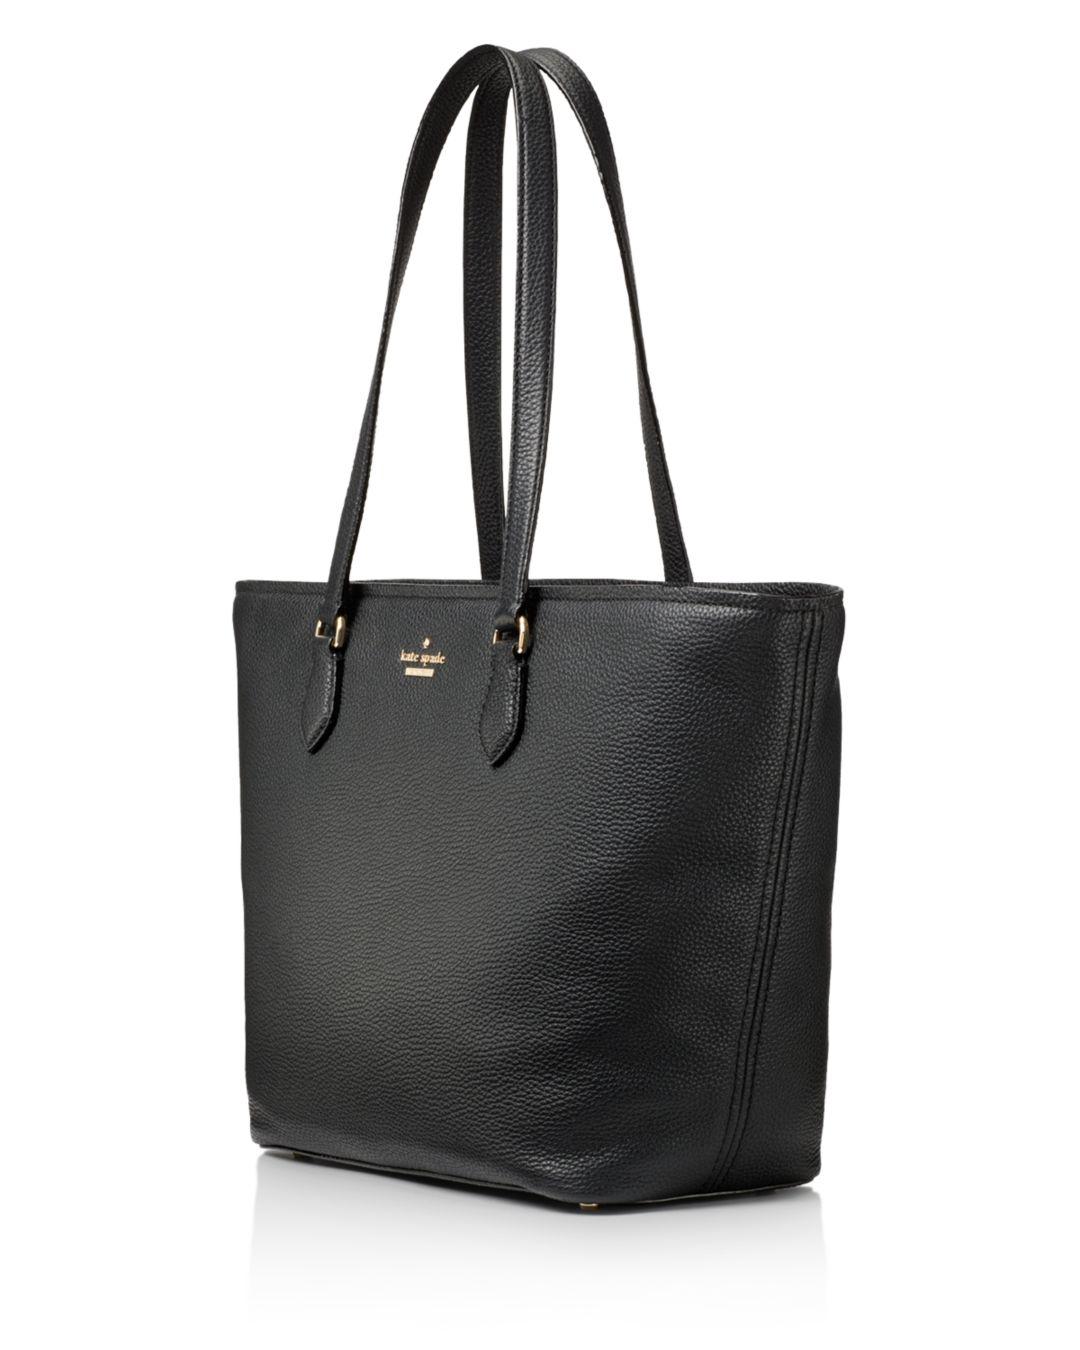 Kate Spade Jana Large Leather Tote in Black - Lyst